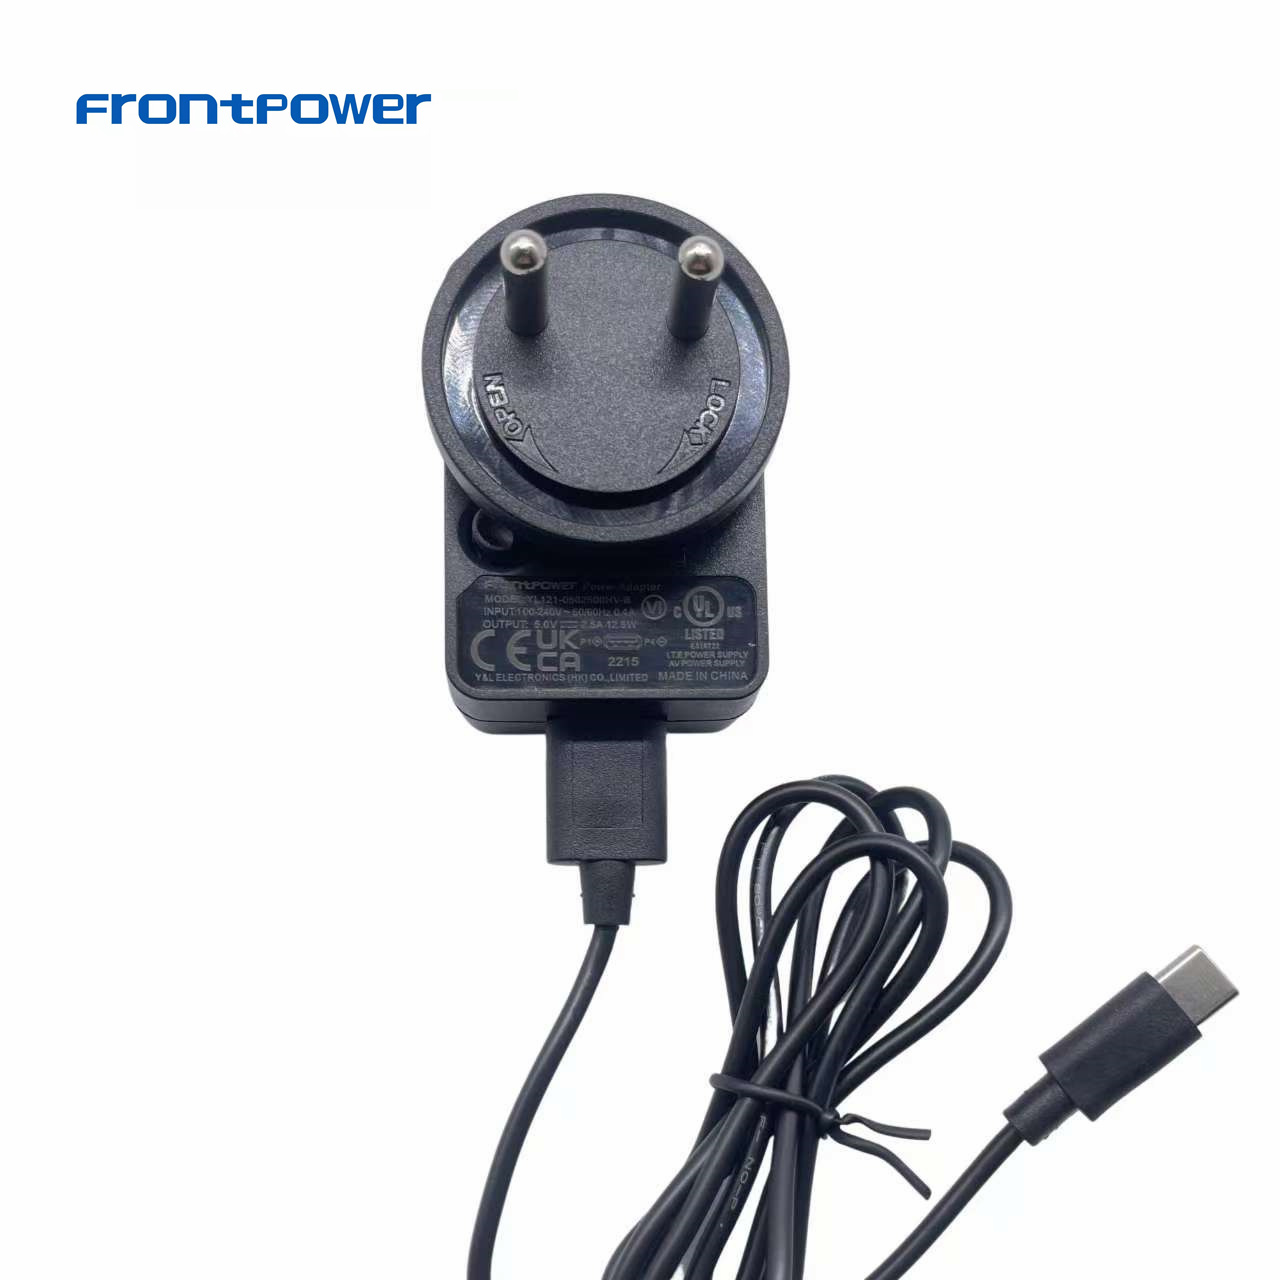 5V 3A detachable type power adapter with BIS certification